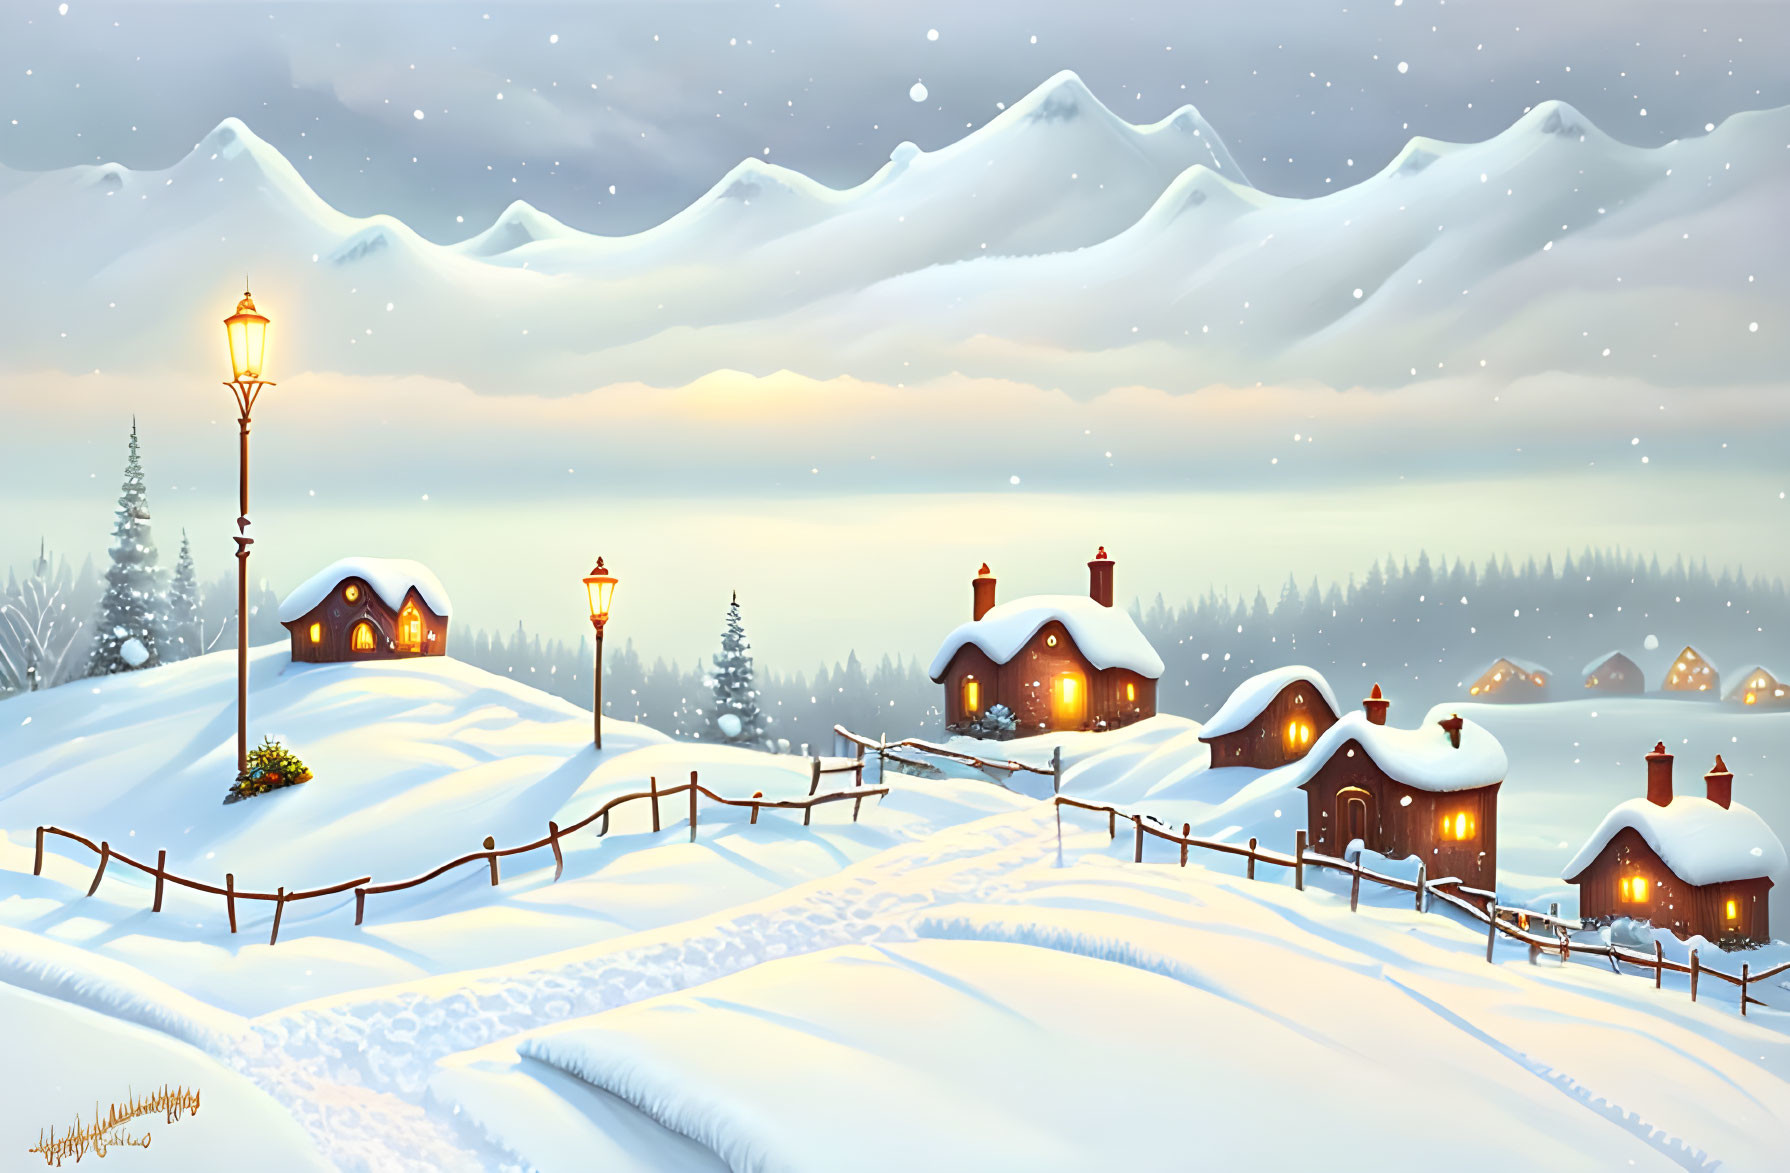 Snow-covered houses and glowing street lamps in serene winter twilight